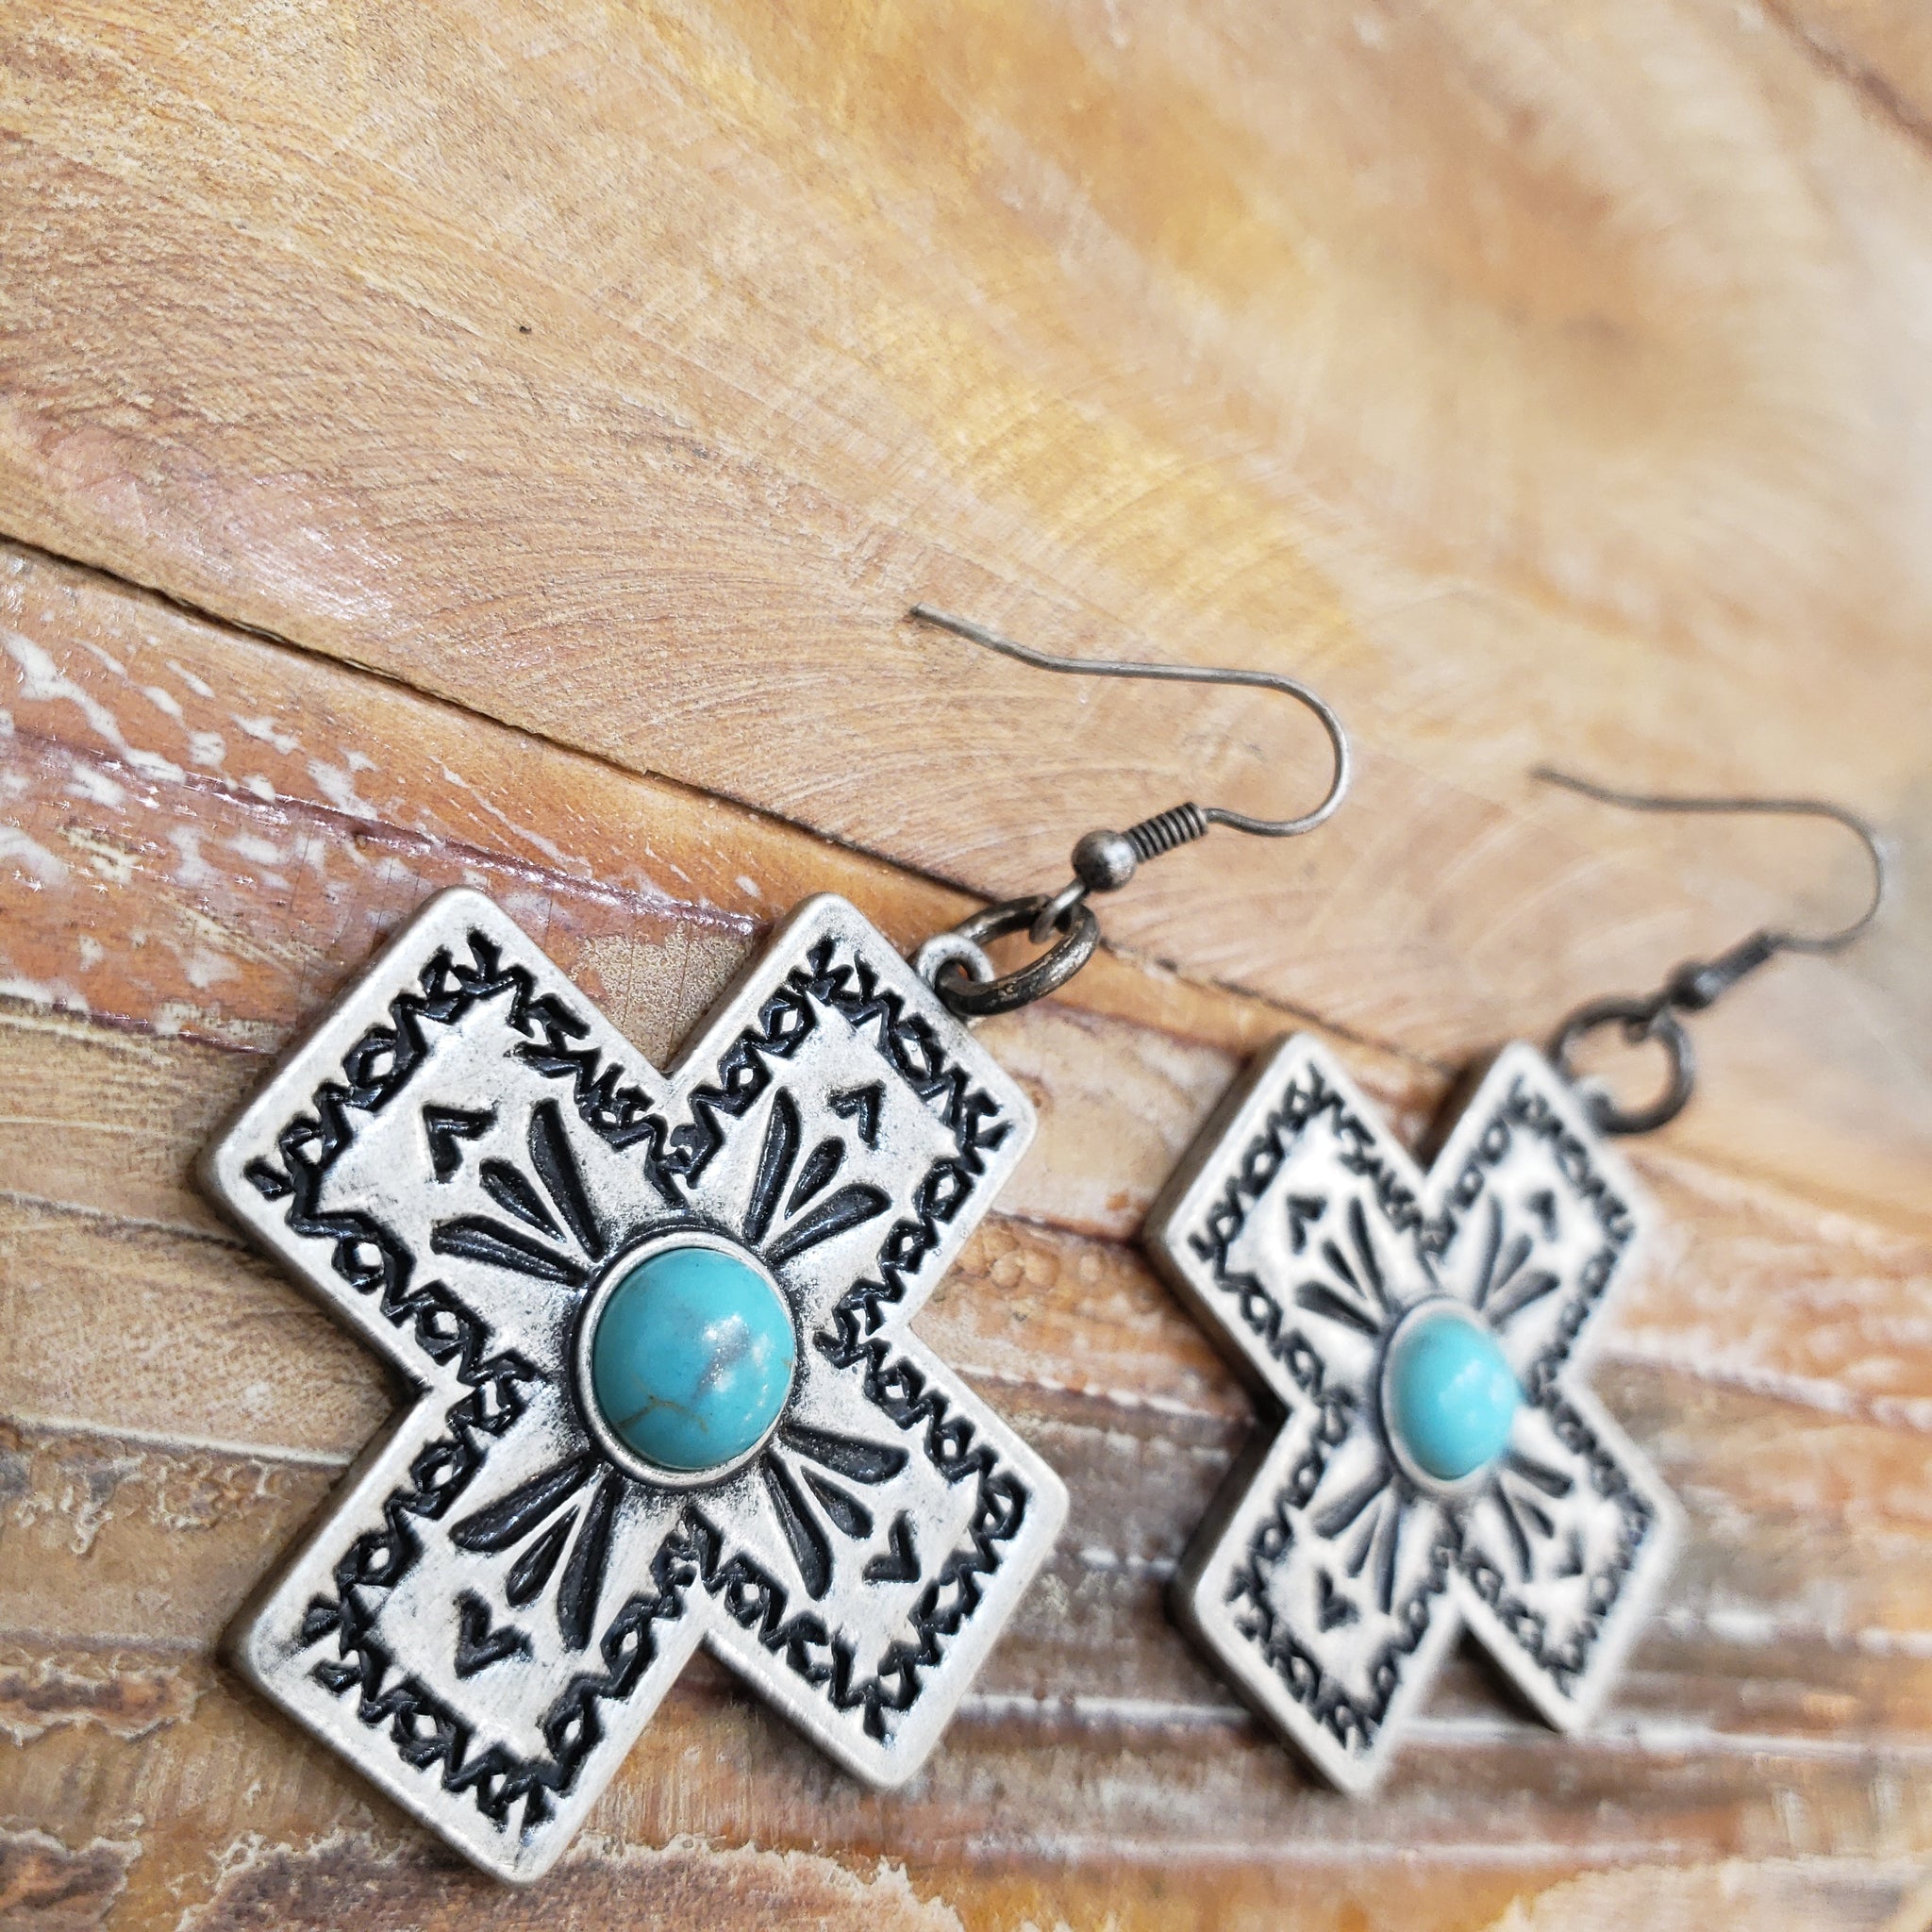 The Silver Cross Turquoise Earrings